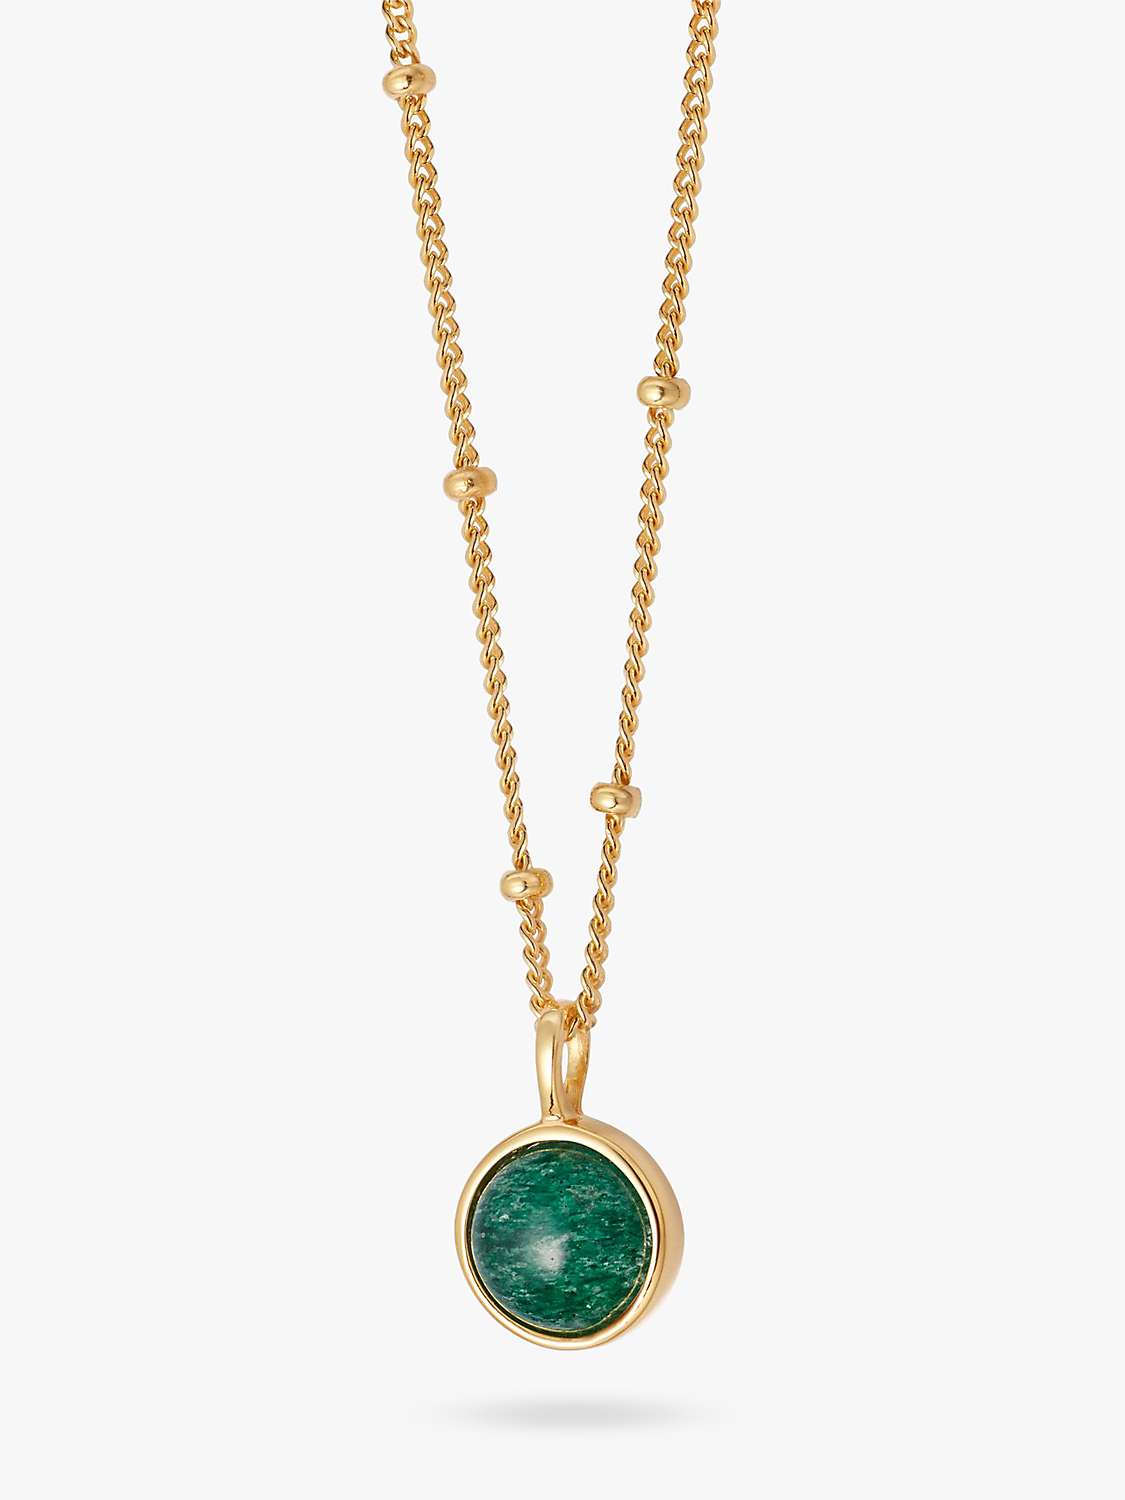 Buy Daisy London Healing Stone Pendant Necklace Online at johnlewis.com